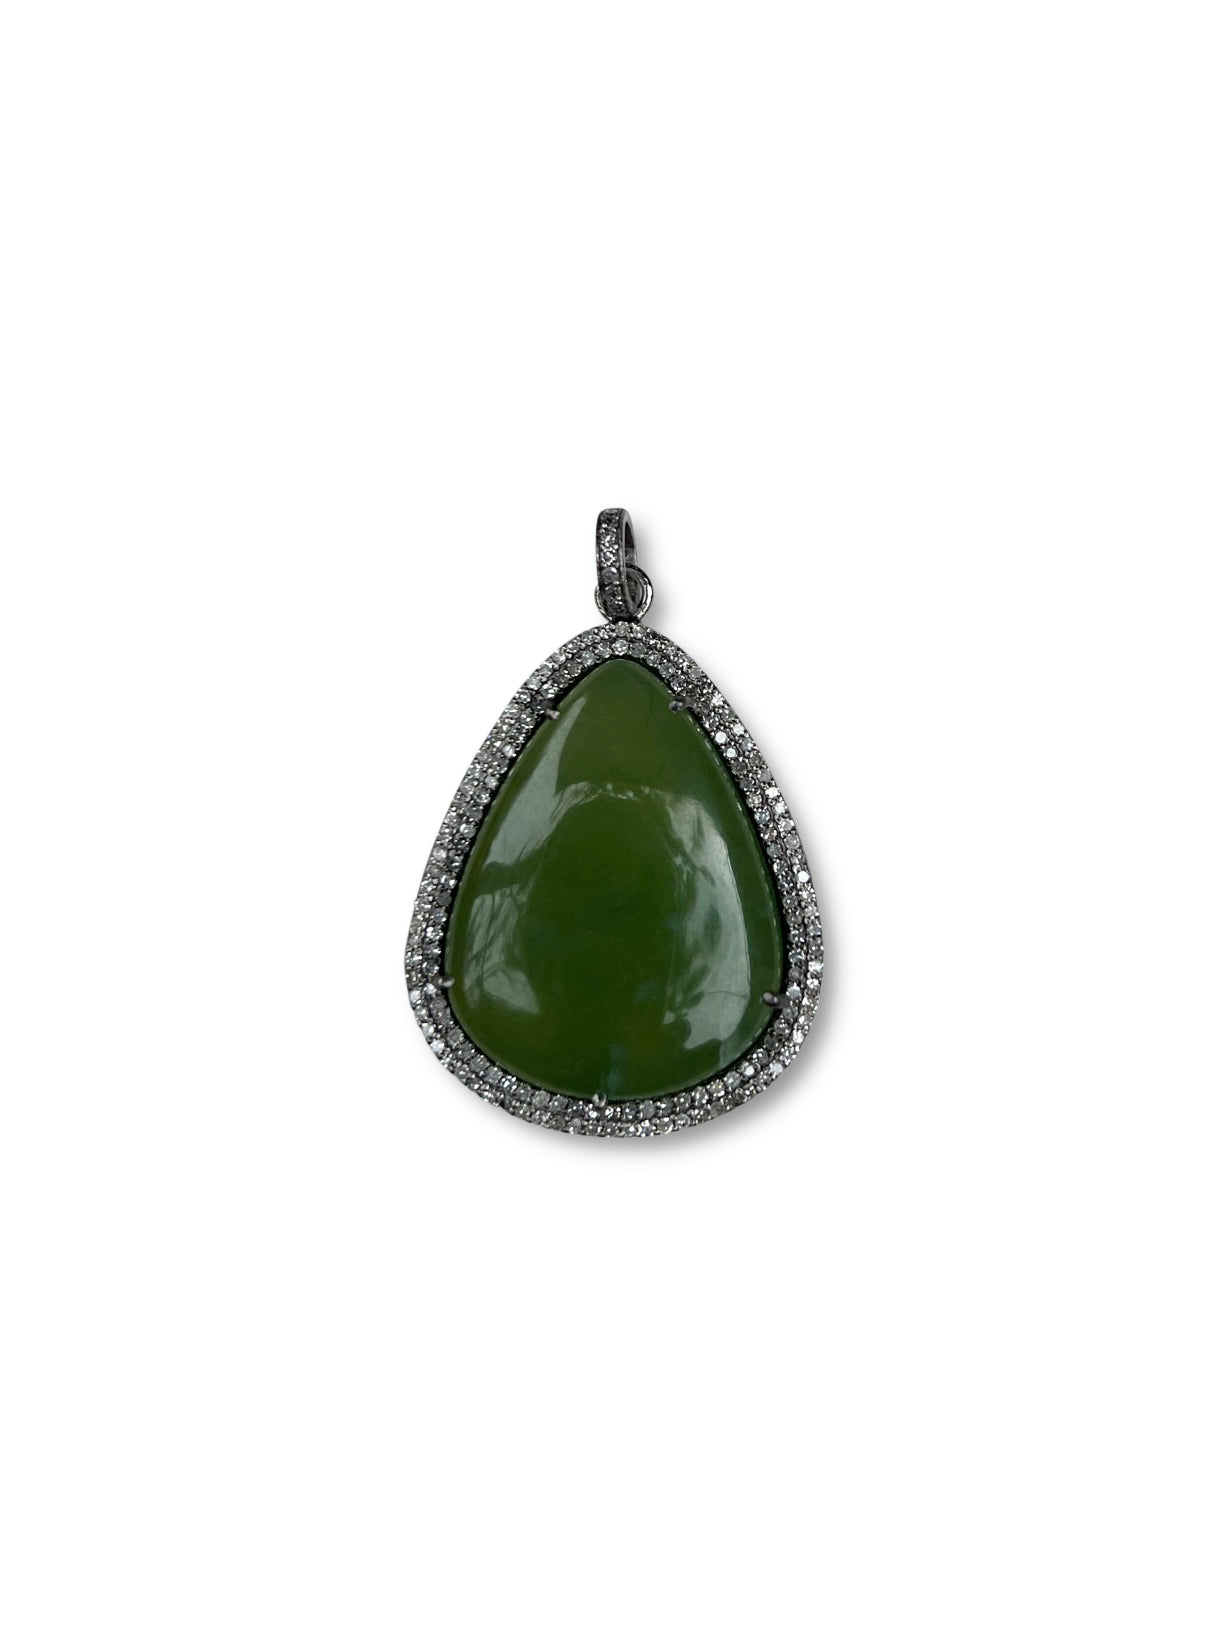 Jade With Pave Diamonds set in Sterling Silver